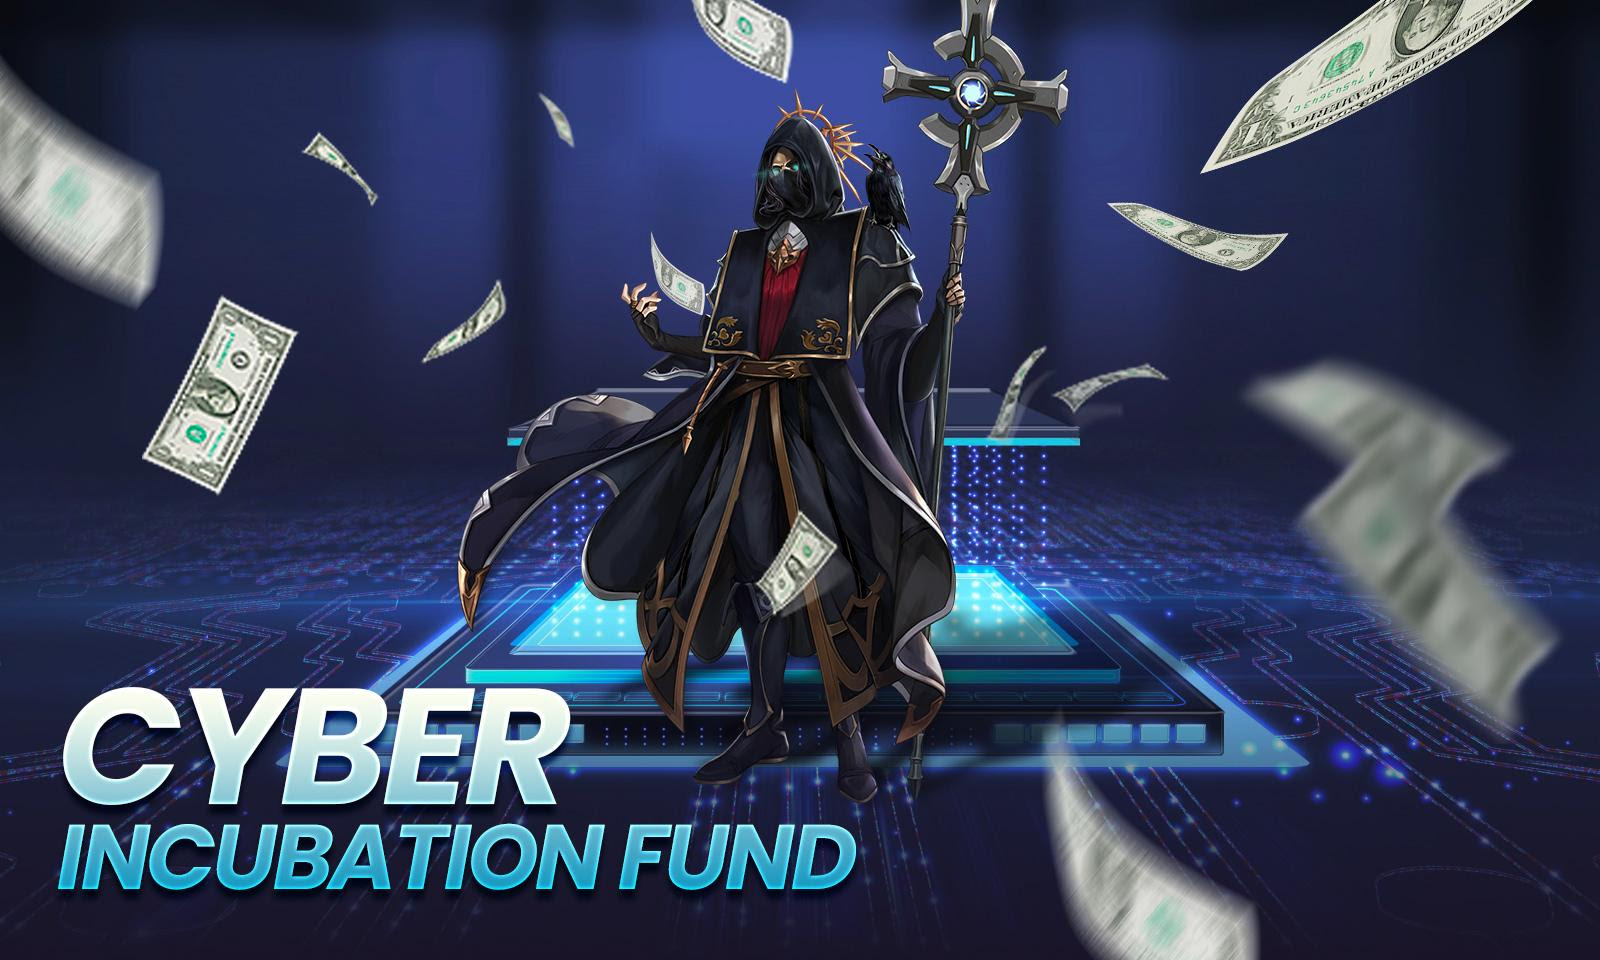 Promoting Web3 Gaming Projects: BinaryX Sets Up Cyber Incubation Fund Worth 220,000 BNX